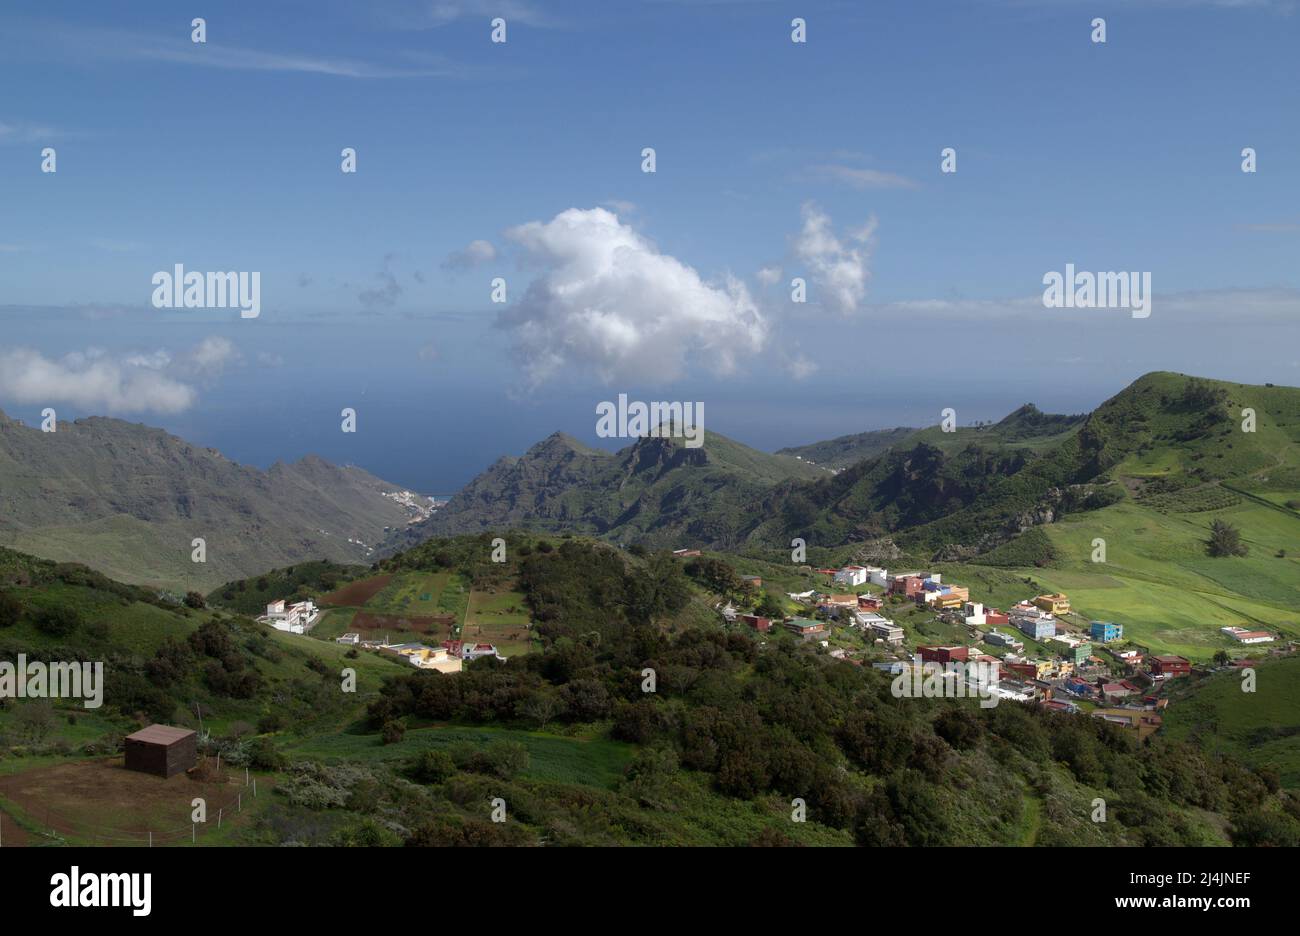 Tenerife, landscape of the north east part of the island from around Mirador De Jardina viewpoint  on a border of Anaga forest park Stock Photo